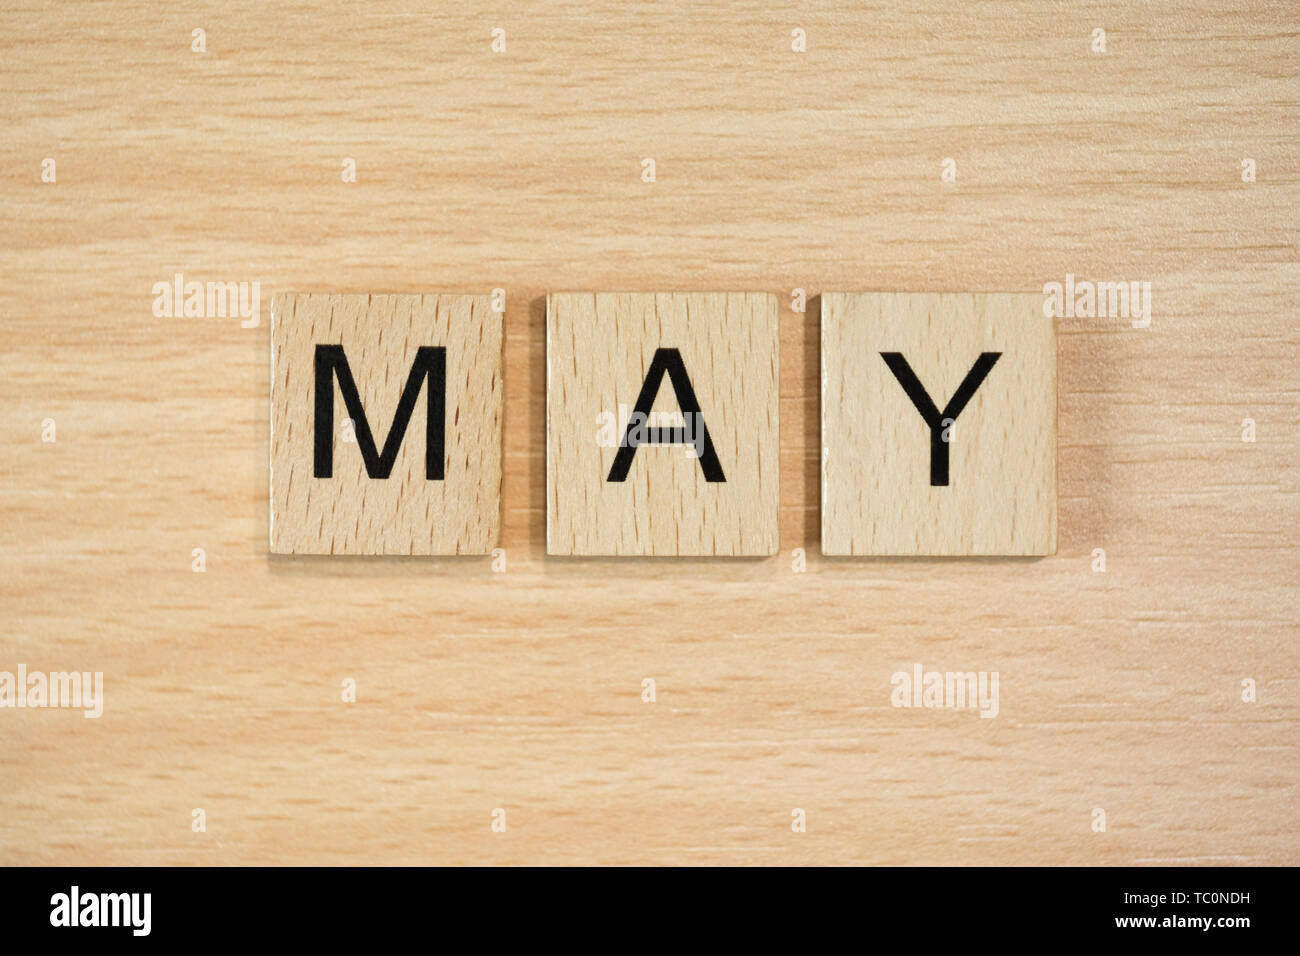 The word March, spelt out using wooden tiles on a wood effect background. Stock Photo